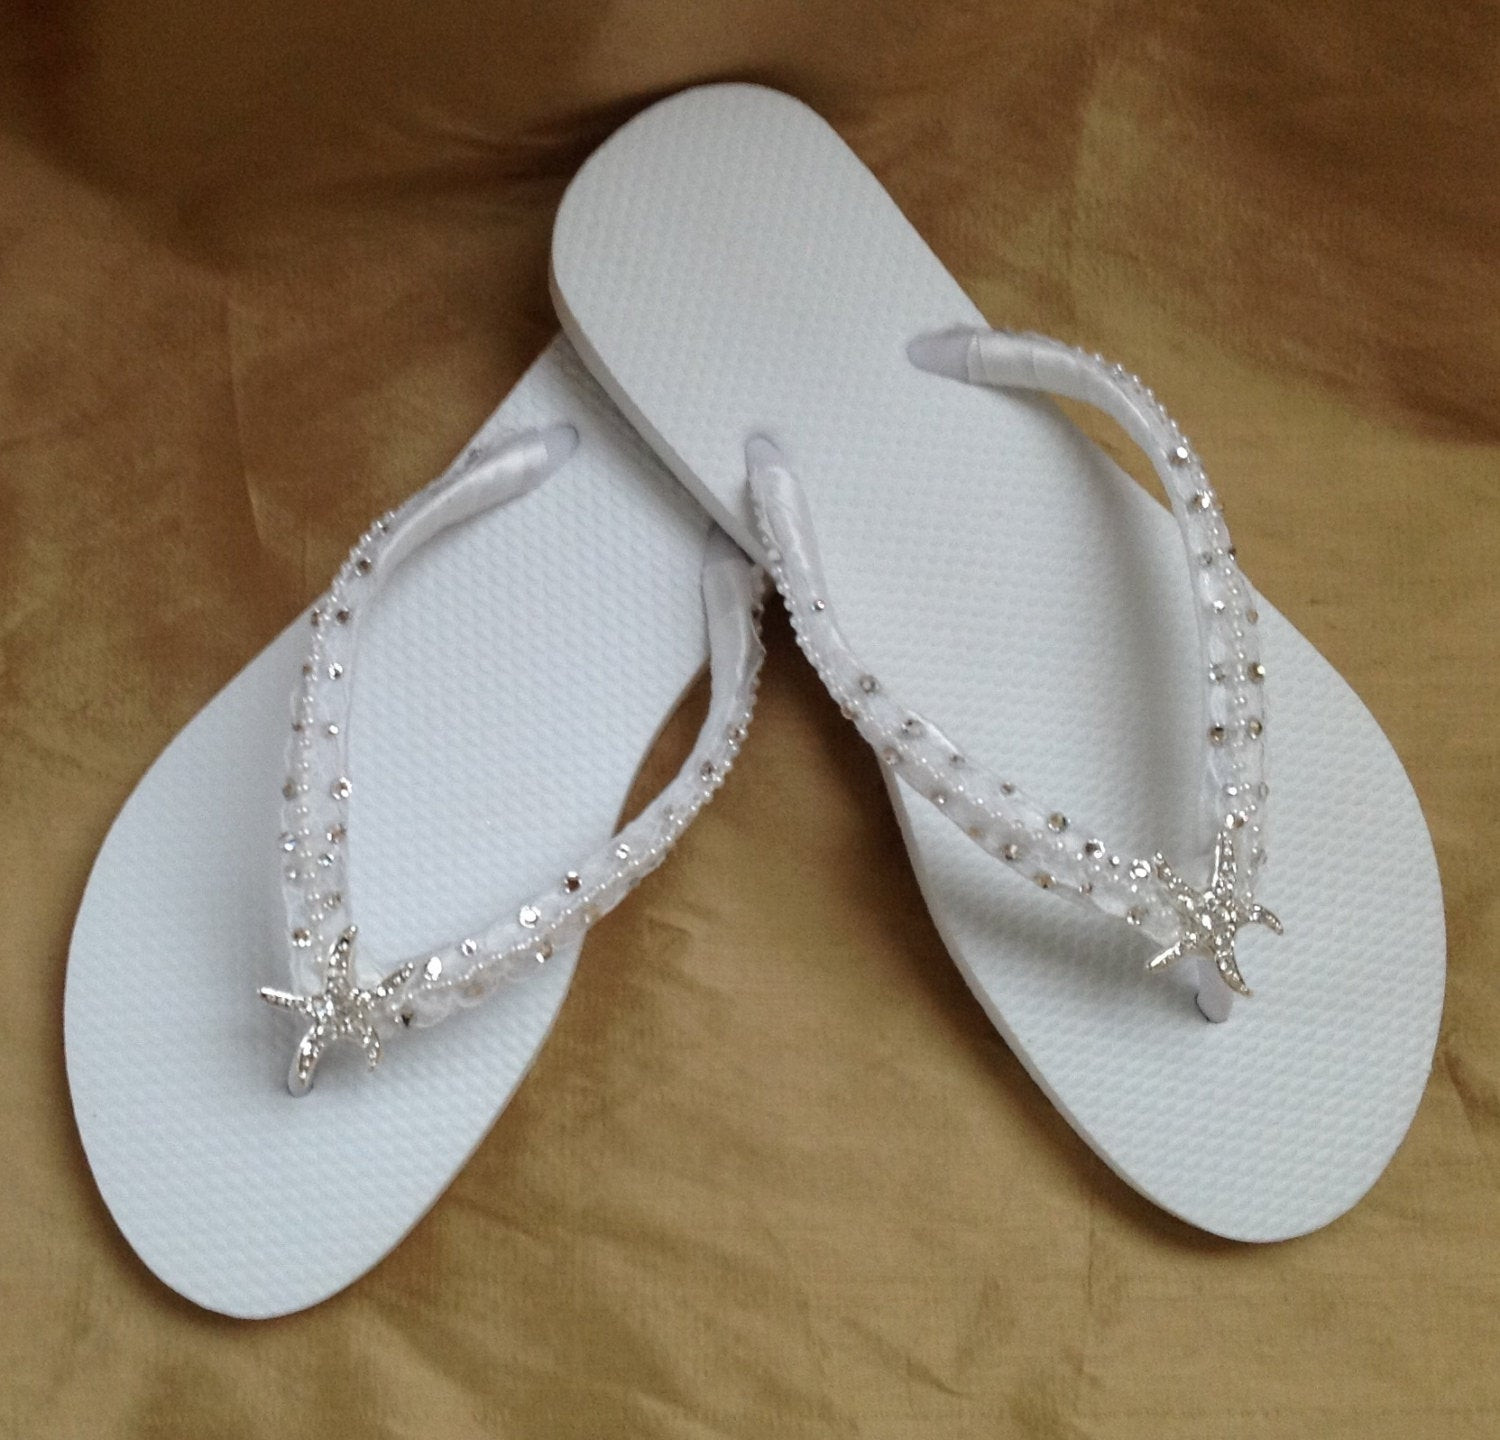 Beach Wedding Flip Flops
 Bridal Flip Flops In White With Tropical Starfish Perfect